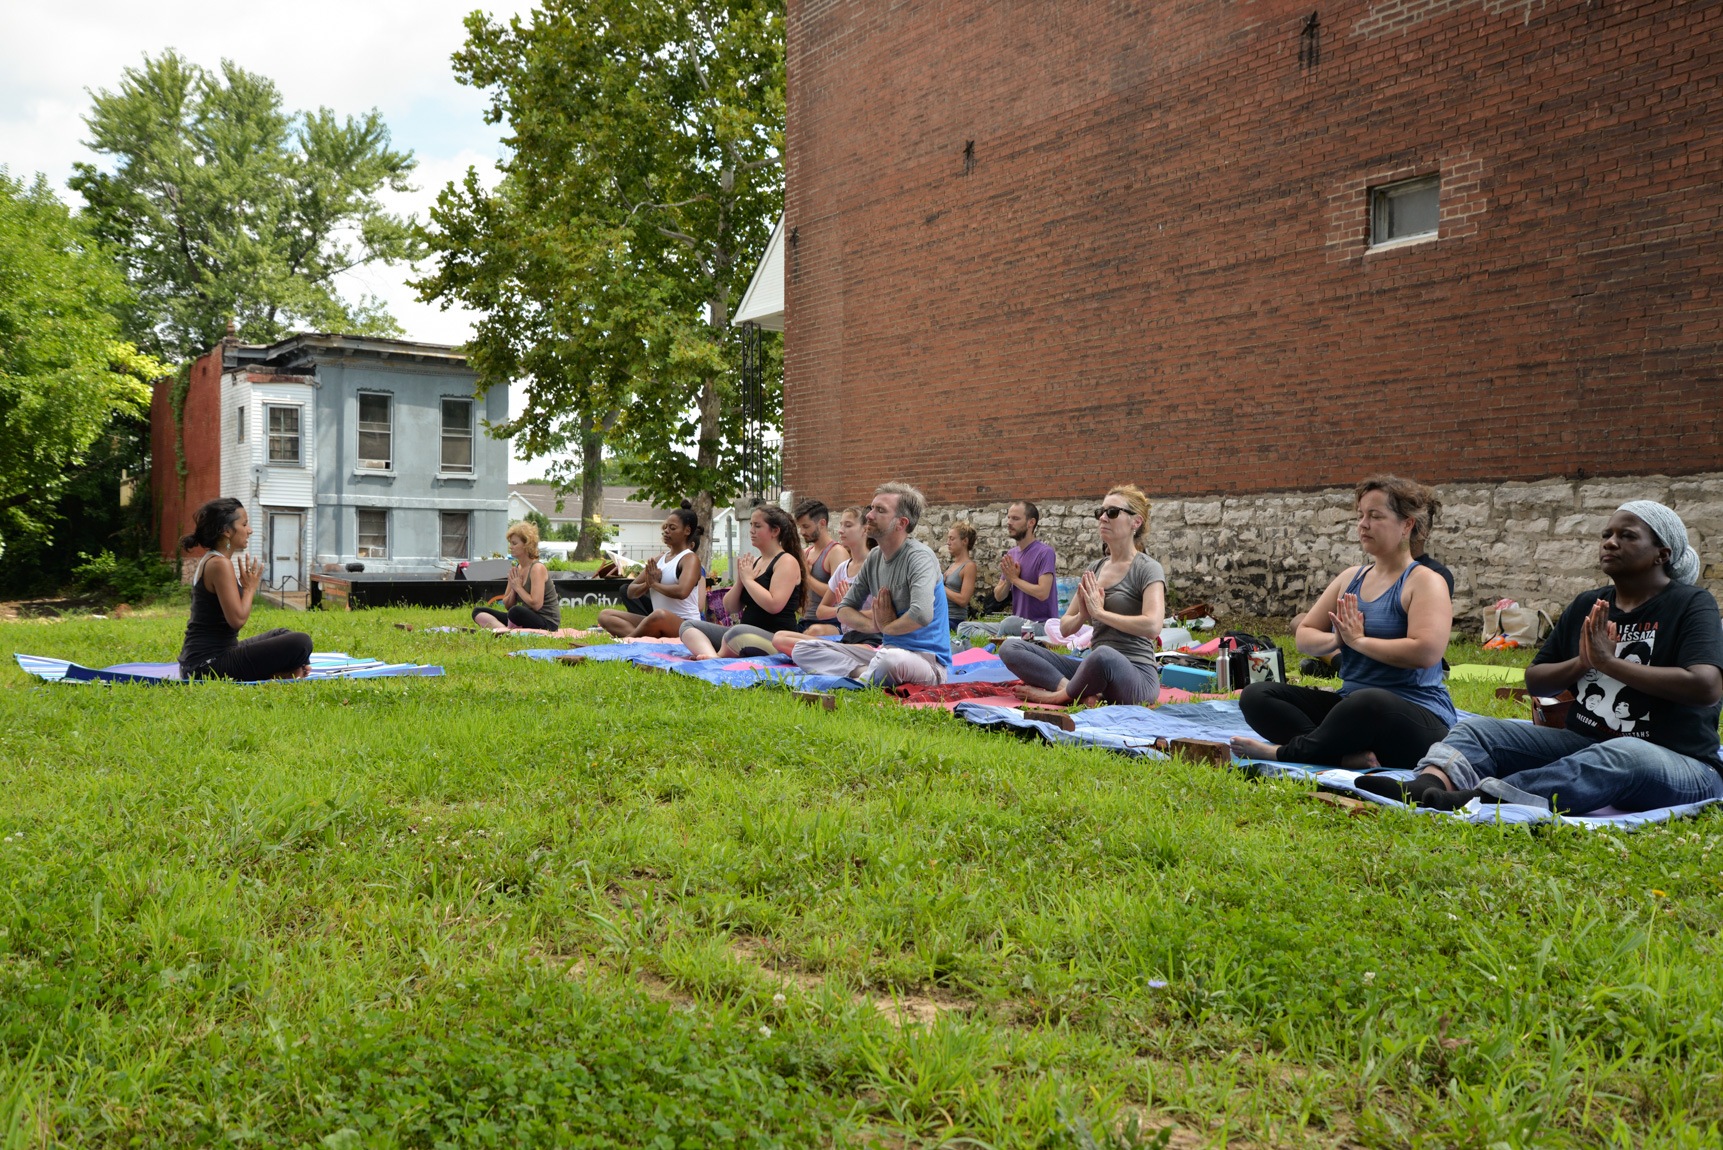 Mallory Nezam leads a gathering in a yoga exercise on a lawn in a residential neighborhood as participants sit cross-legged and their hands are in a praying pose.